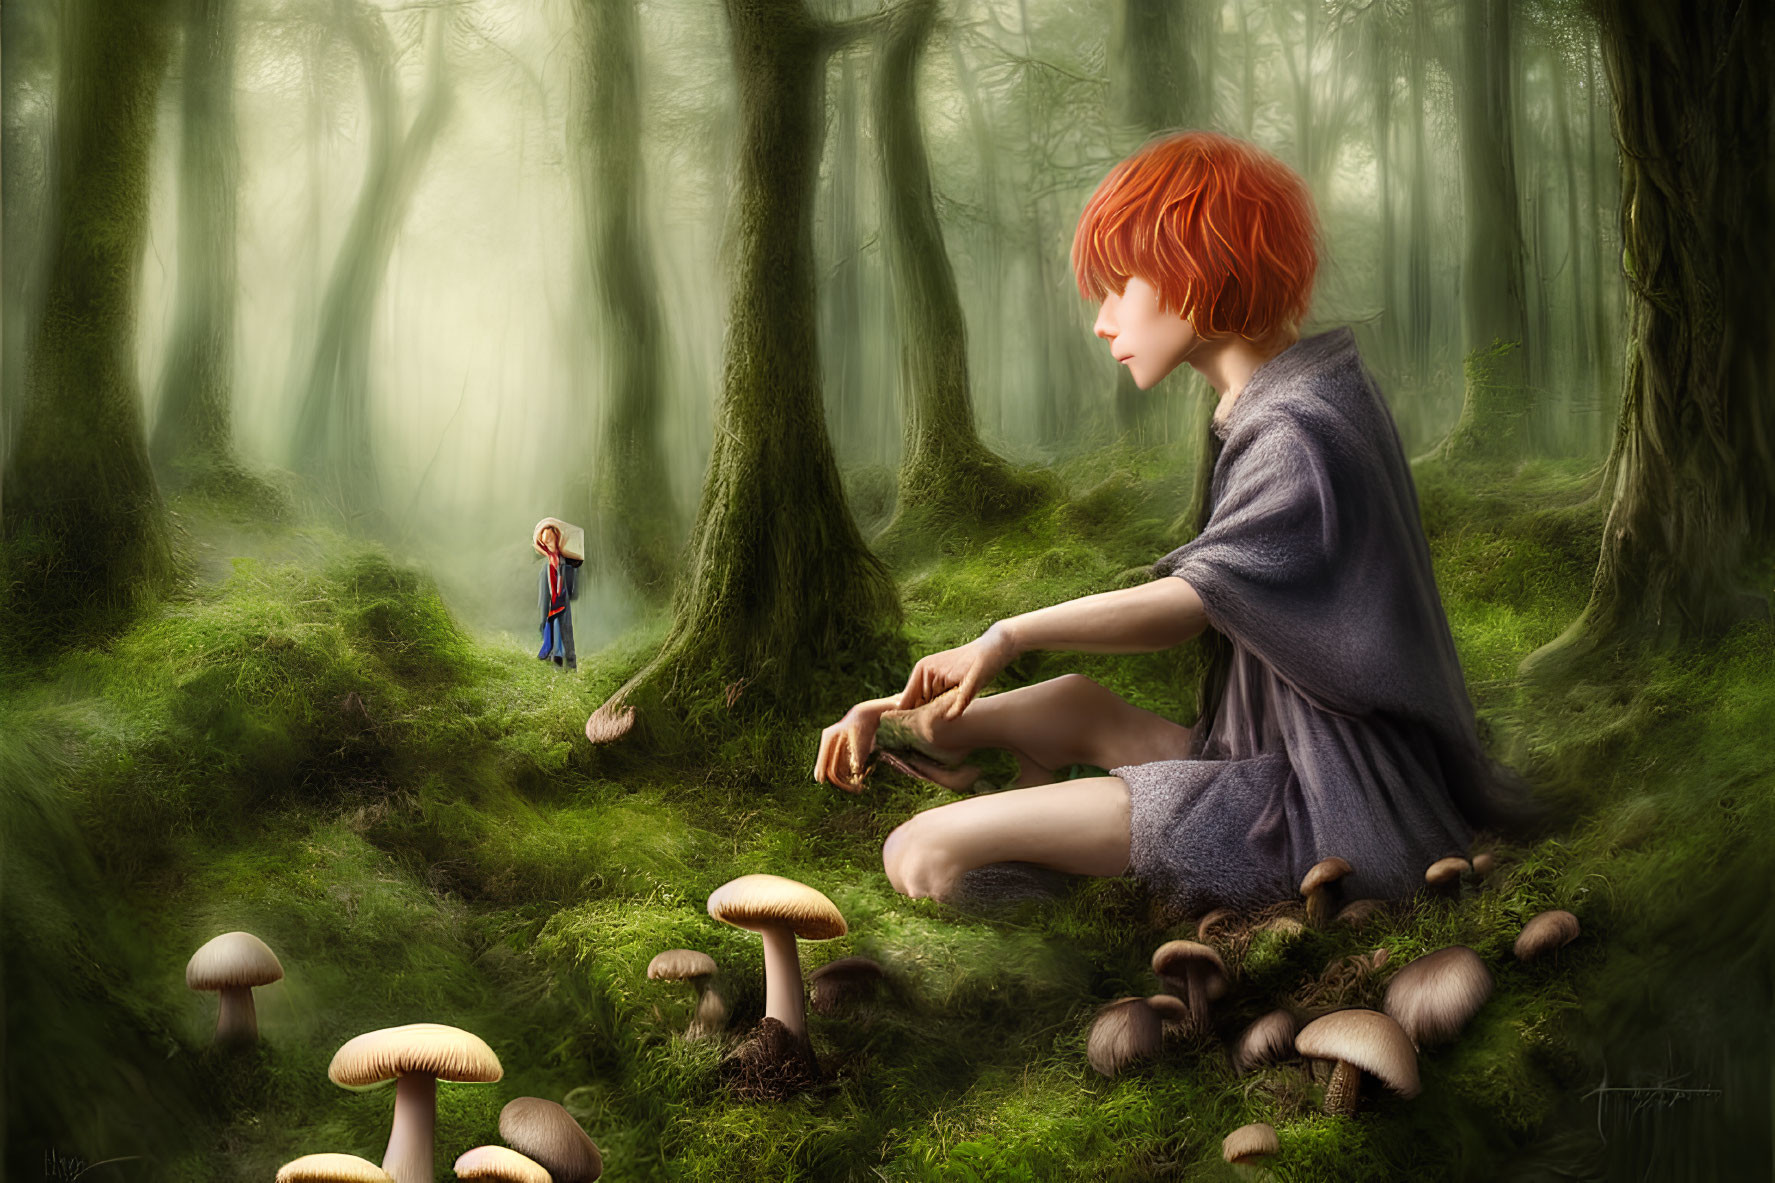 Digital art: Giant boy, tiny girl in mystical forest with oversized mushrooms in ethereal setting